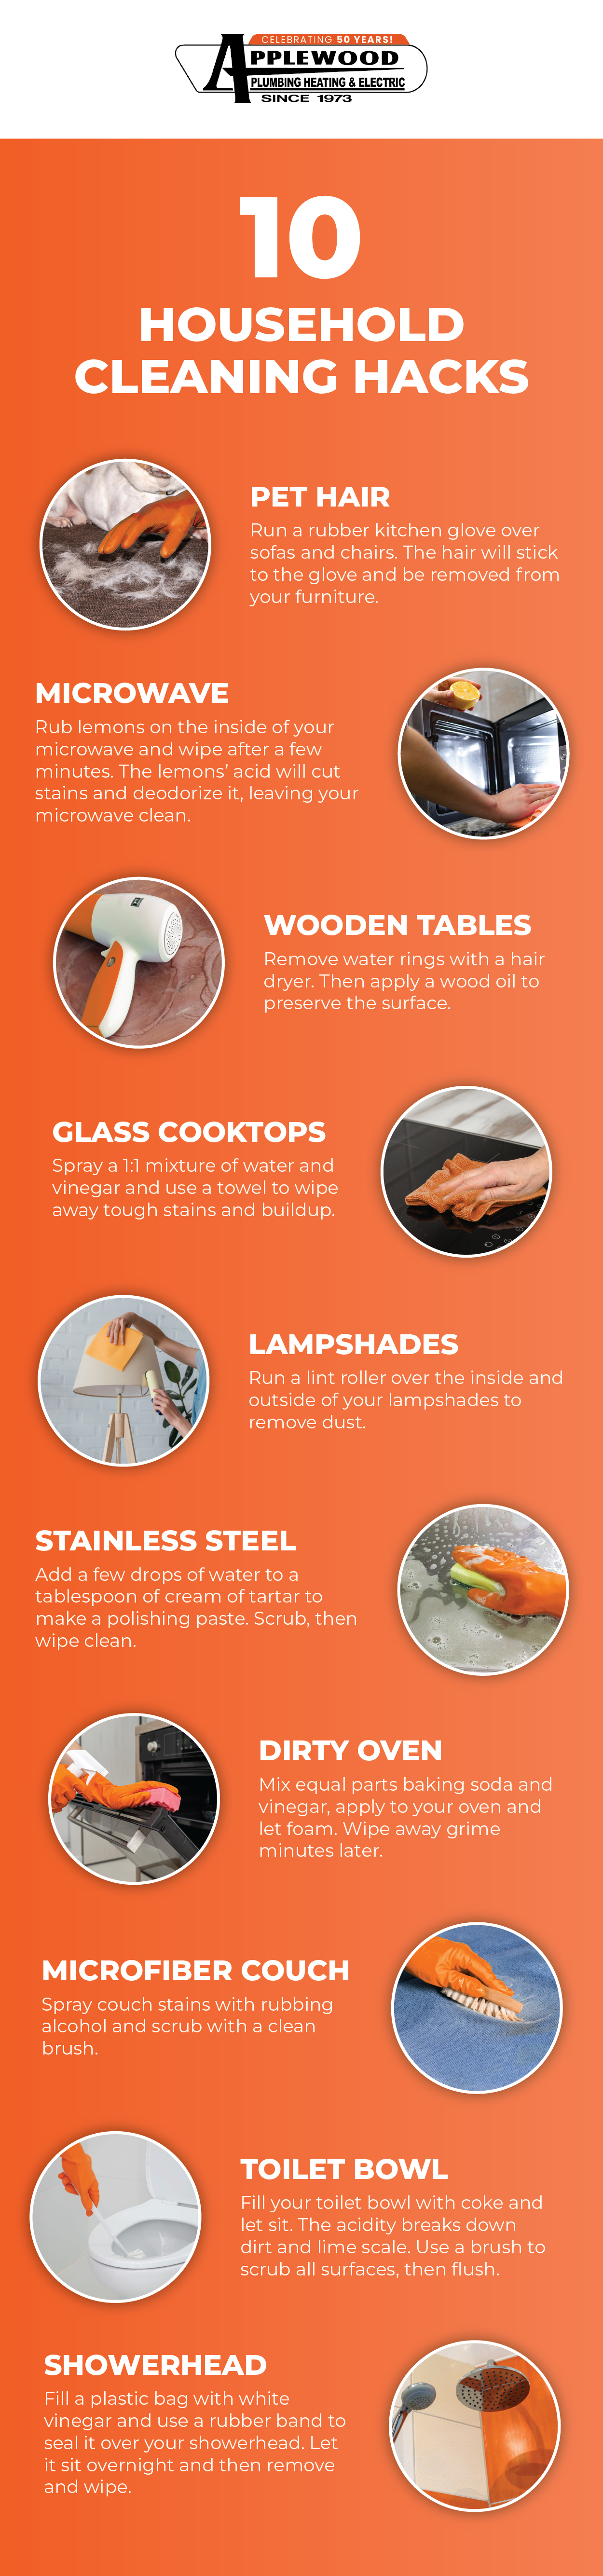 Infographic showing helpful cleaning tips.